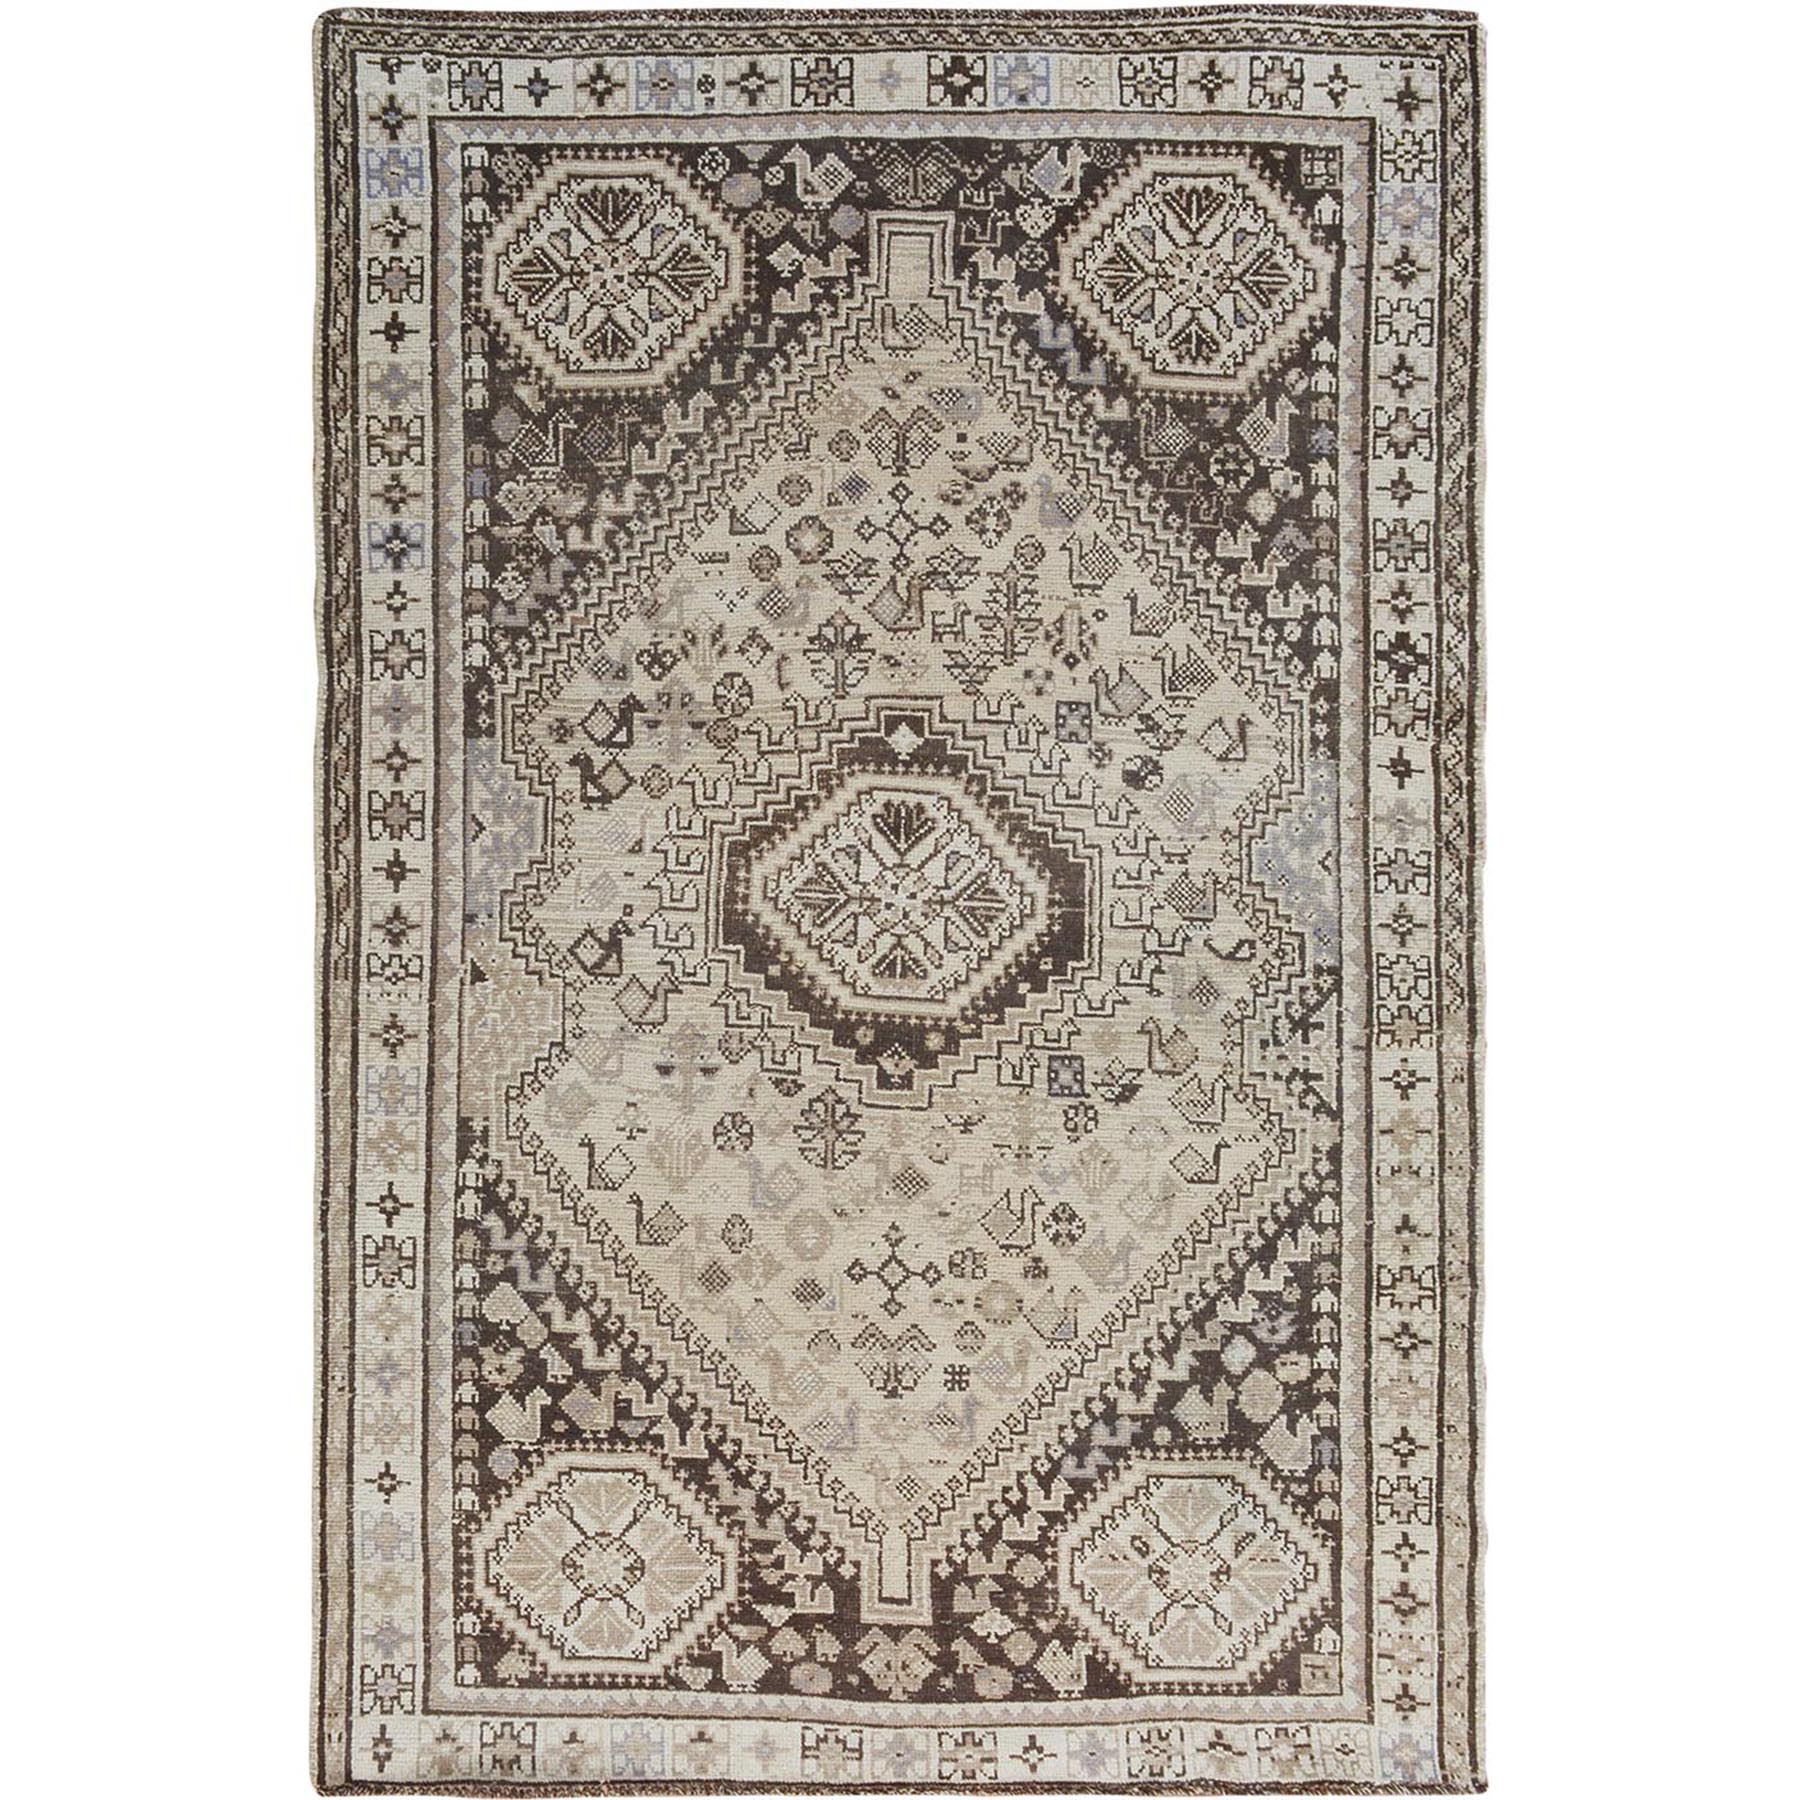 5'2"X8' Beige Worn Down Vintage Persian Shiraz Pure Wool Hand Knotted Oriental Rug moae7bc9